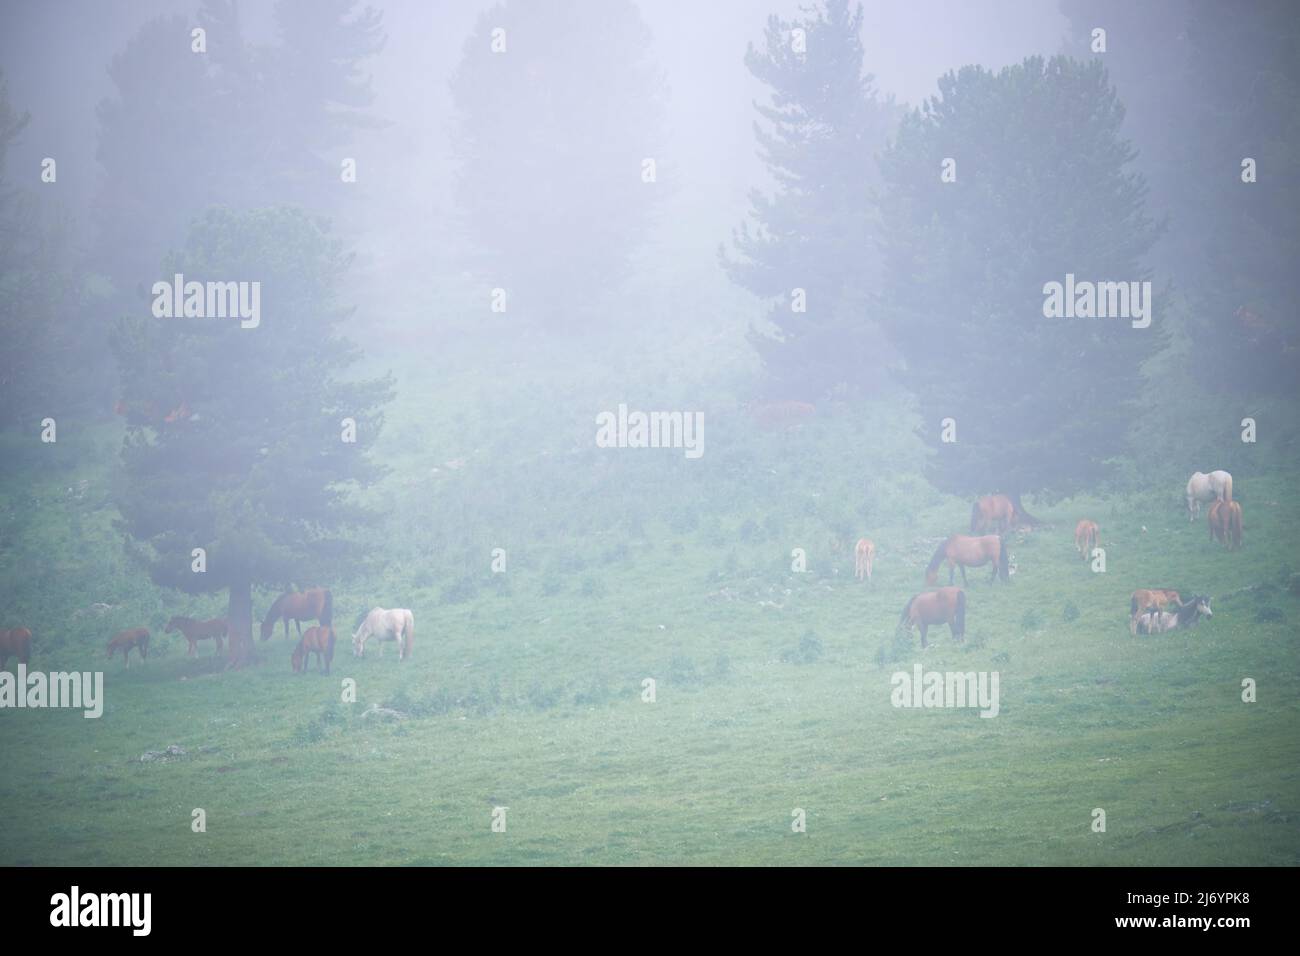 Morning fog in mountain forest. Horses graze in the alpine meadow. Altai, Siberia. Stock Photo